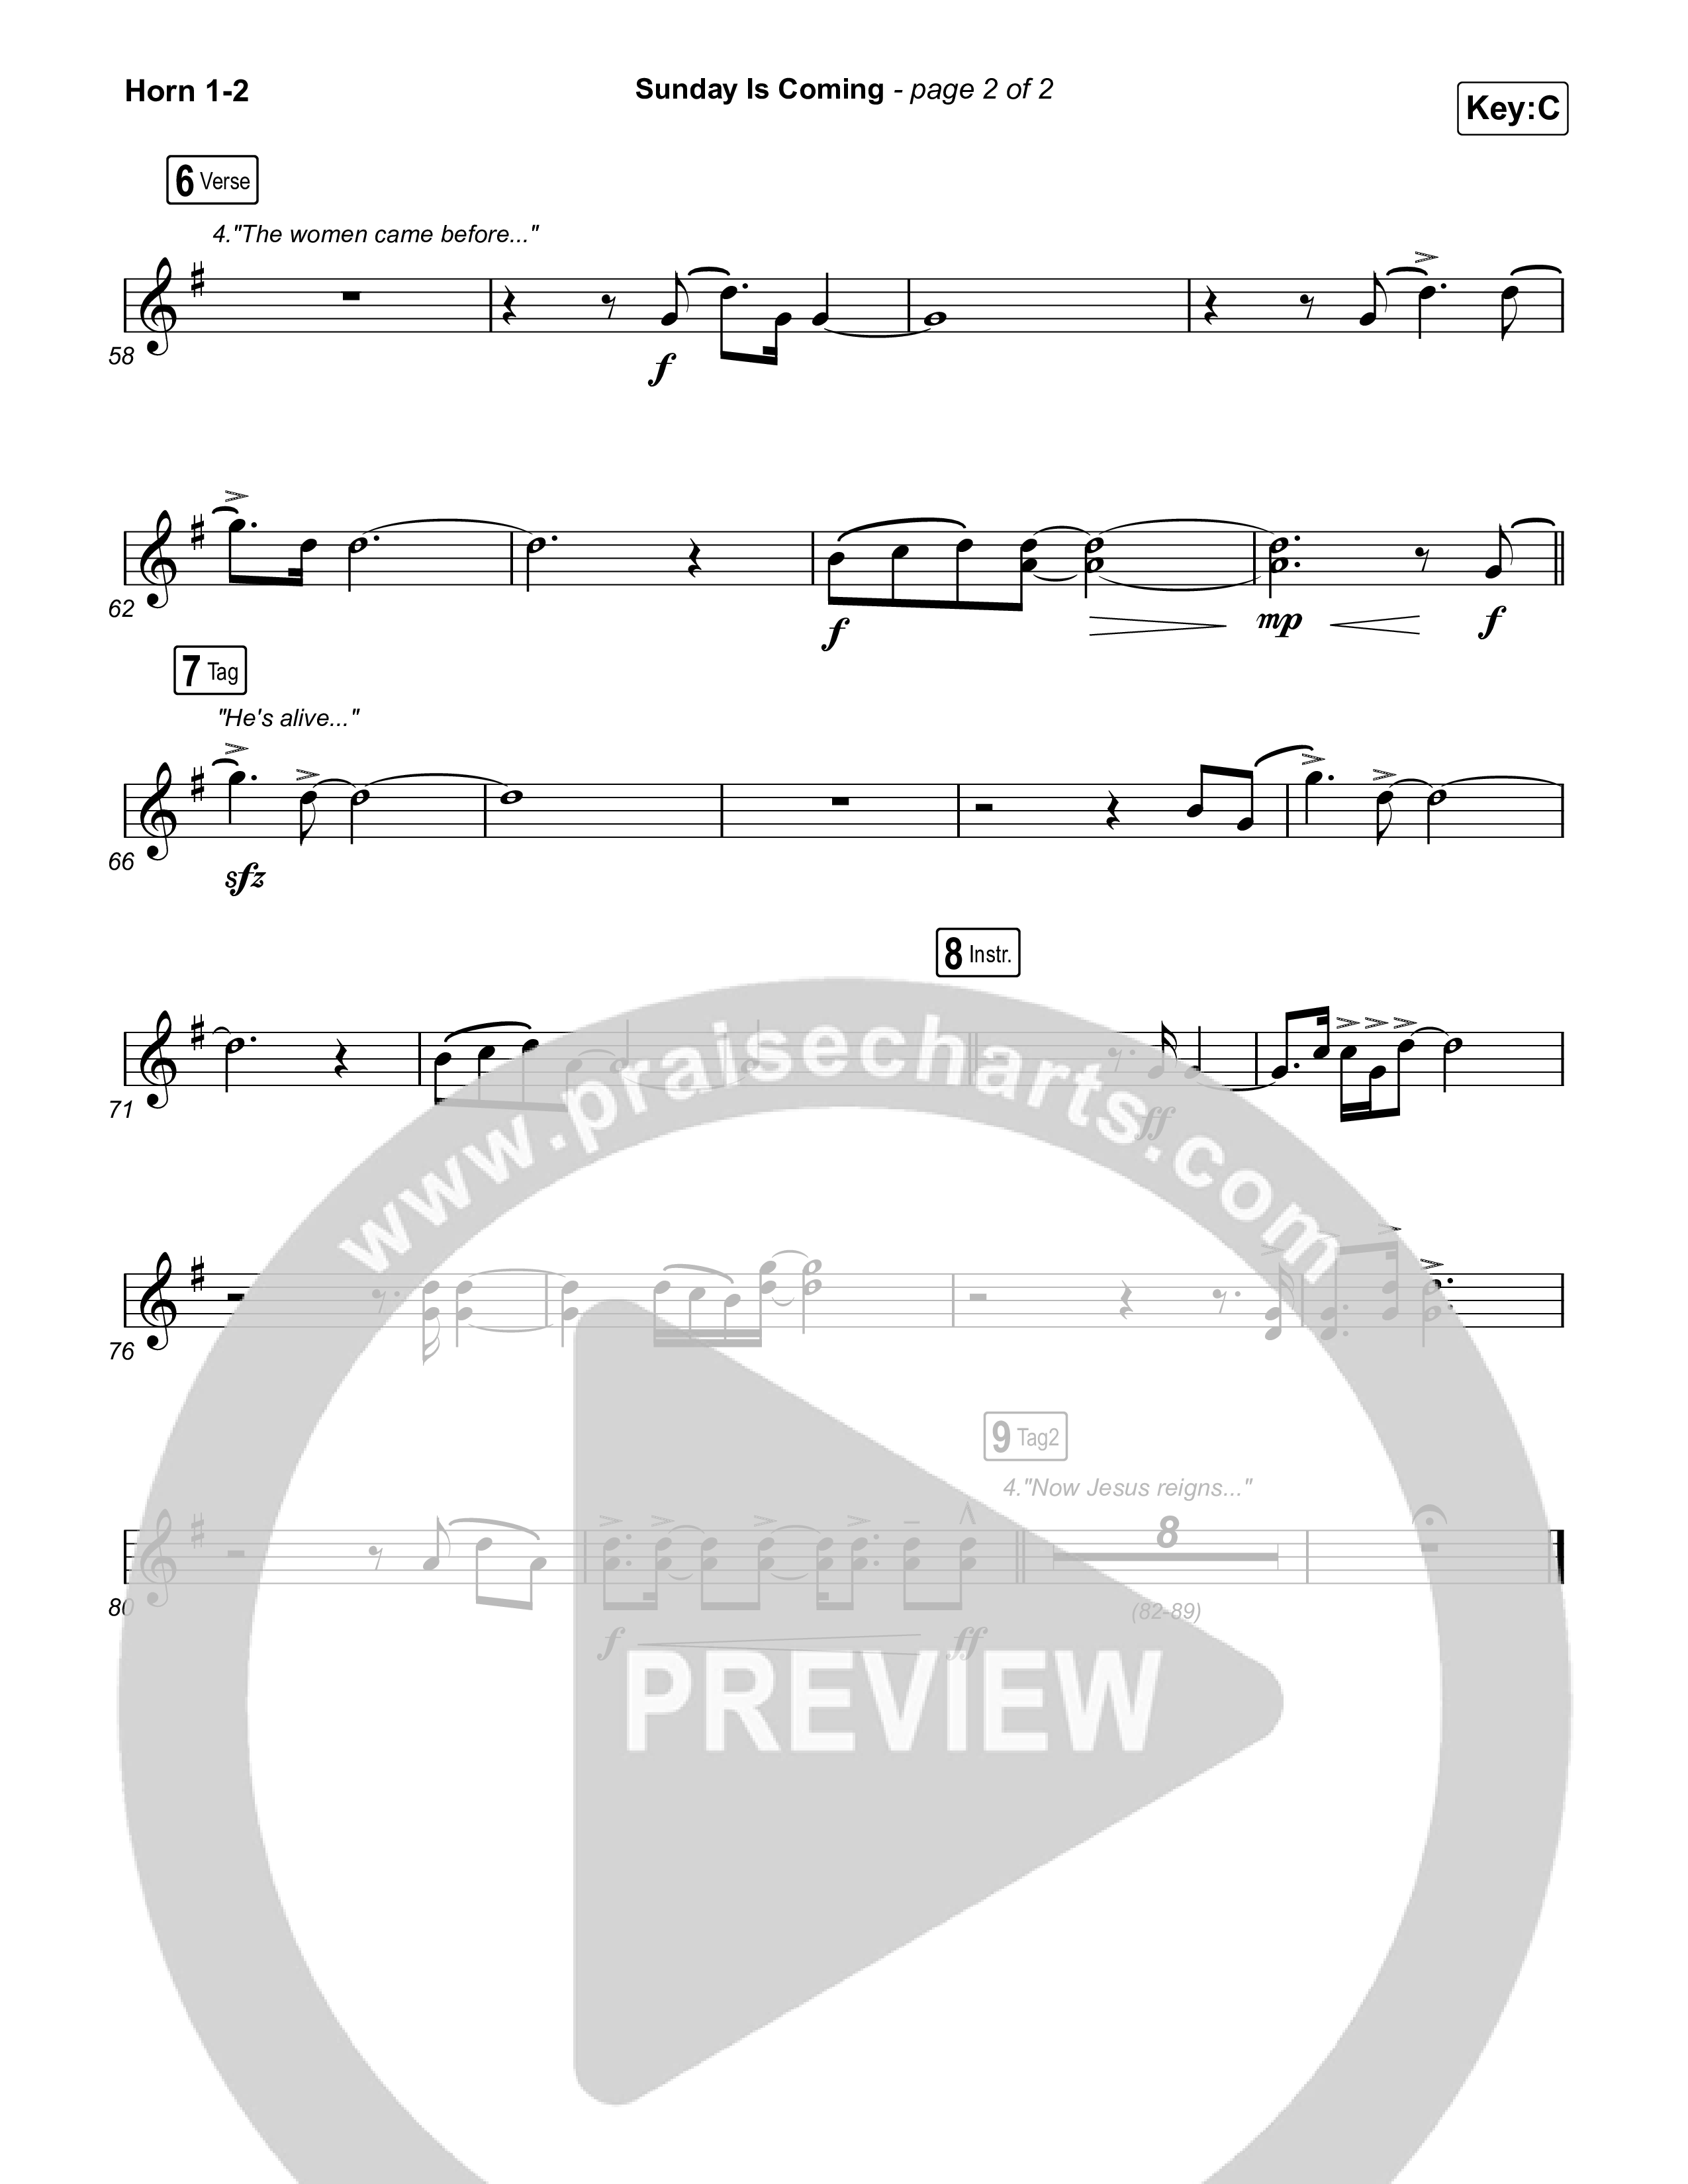 Sunday Is Coming French Horn 1,2 (The Worship Initiative / John Marc Kohl)